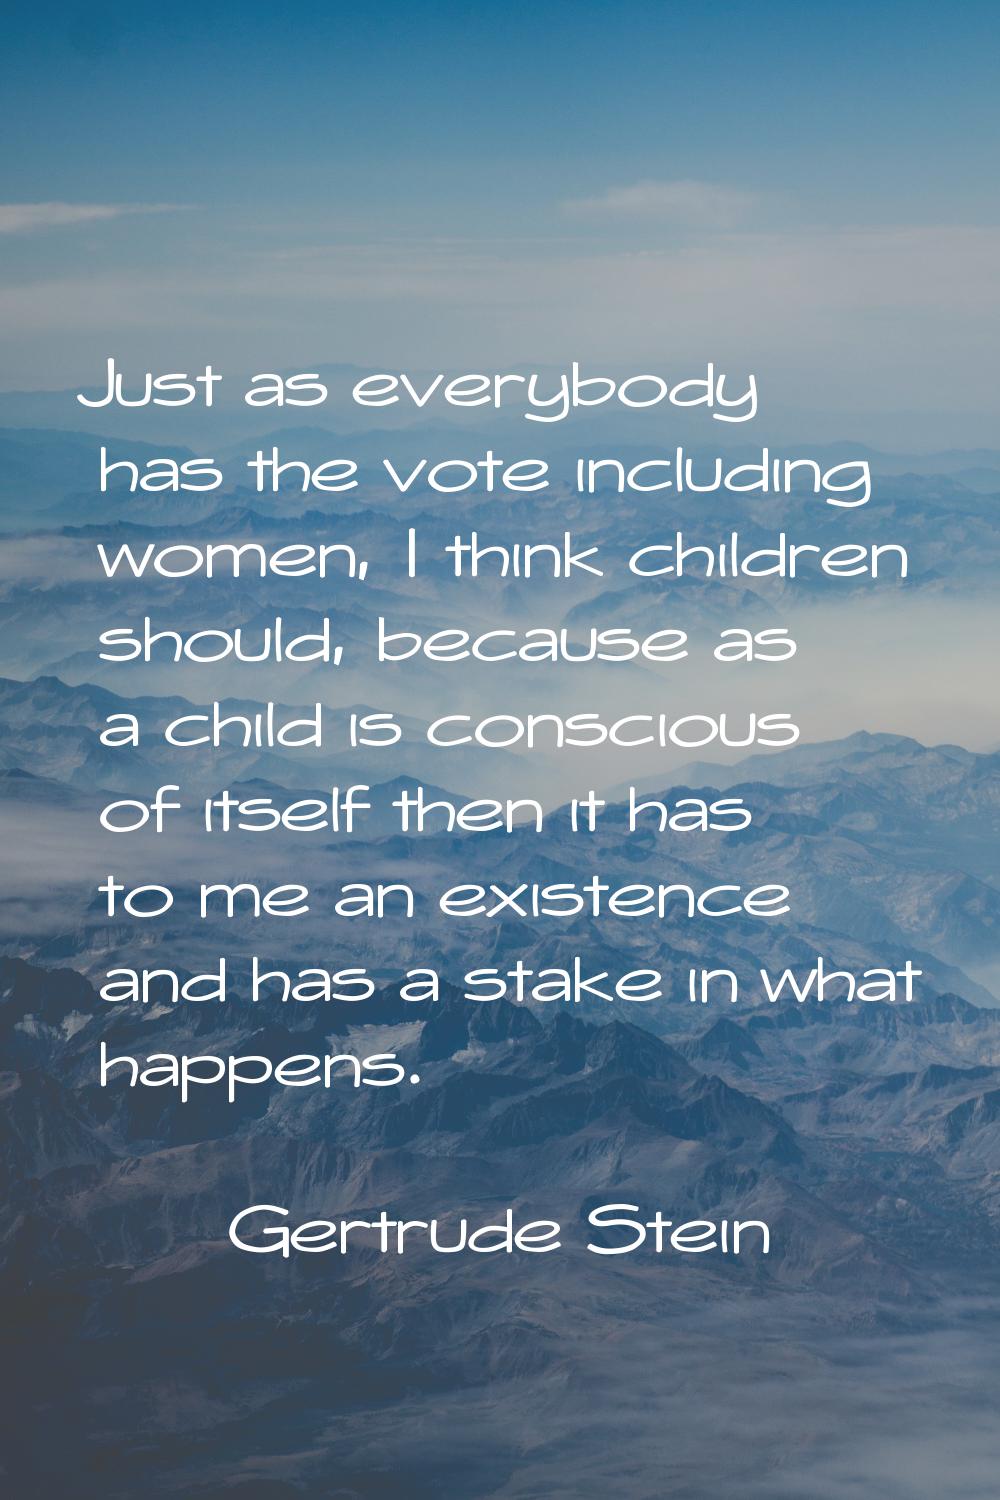 Just as everybody has the vote including women, I think children should, because as a child is cons